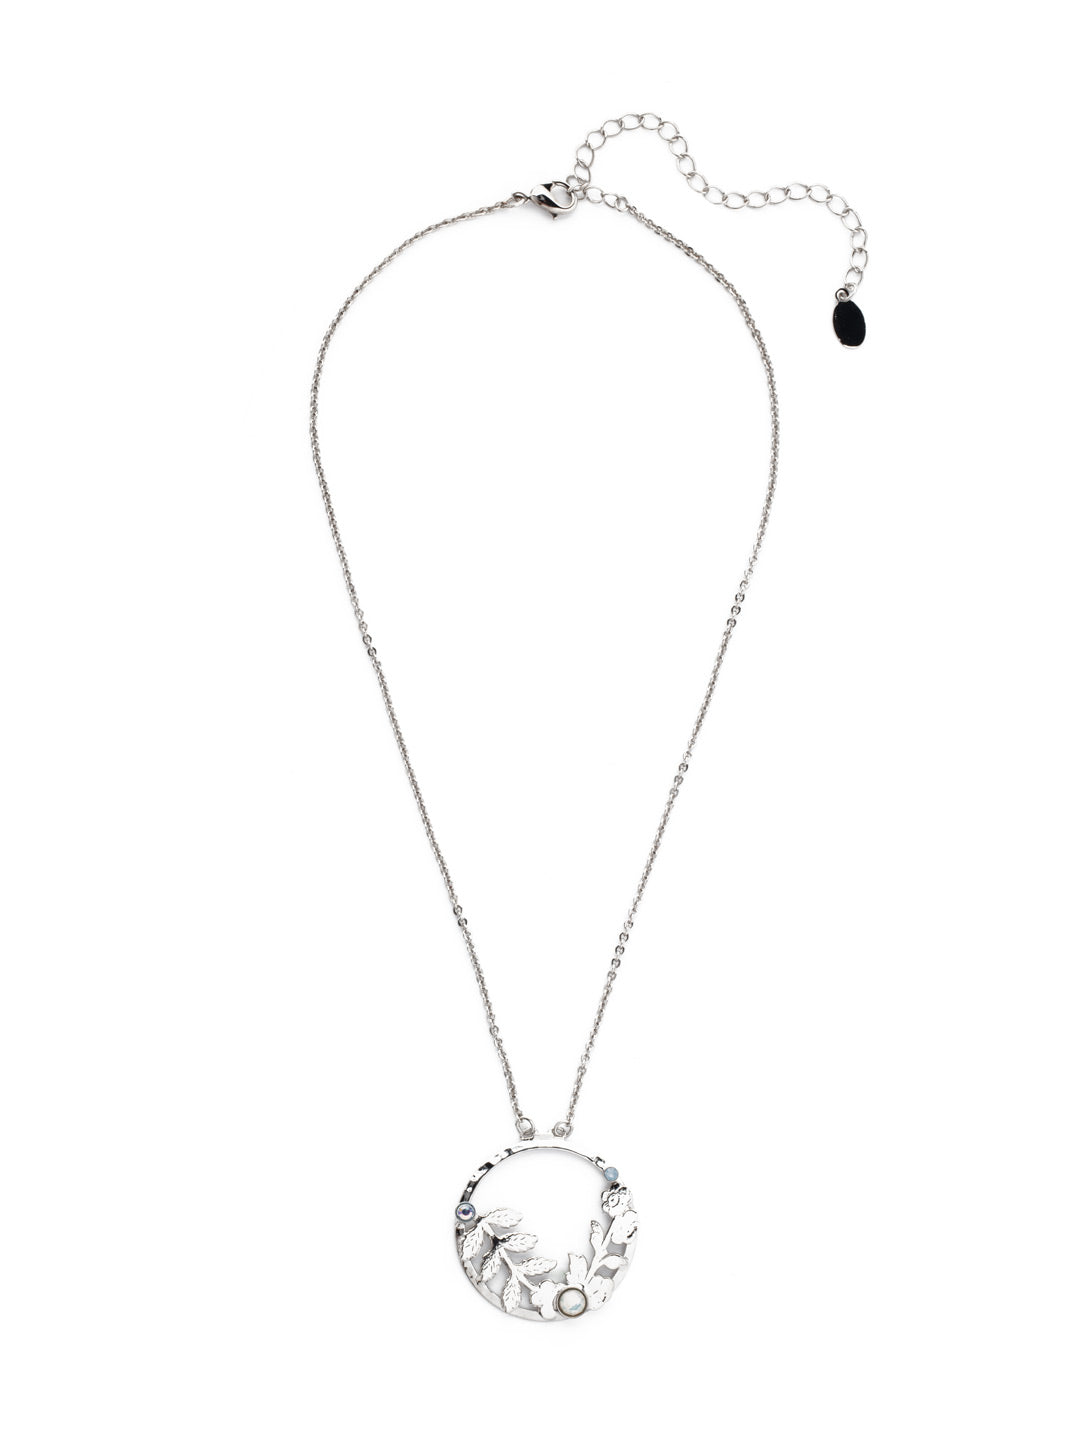 Calypso Pendant Necklace - NEV56PDWNB - <p>Fasten on the Calypso Pendant Necklace and showcase metallic leafwork in a classic circular shape with just a splash of sparkling crystals. From Sorrelli's Windsor Blue collection in our Palladium finish.</p>